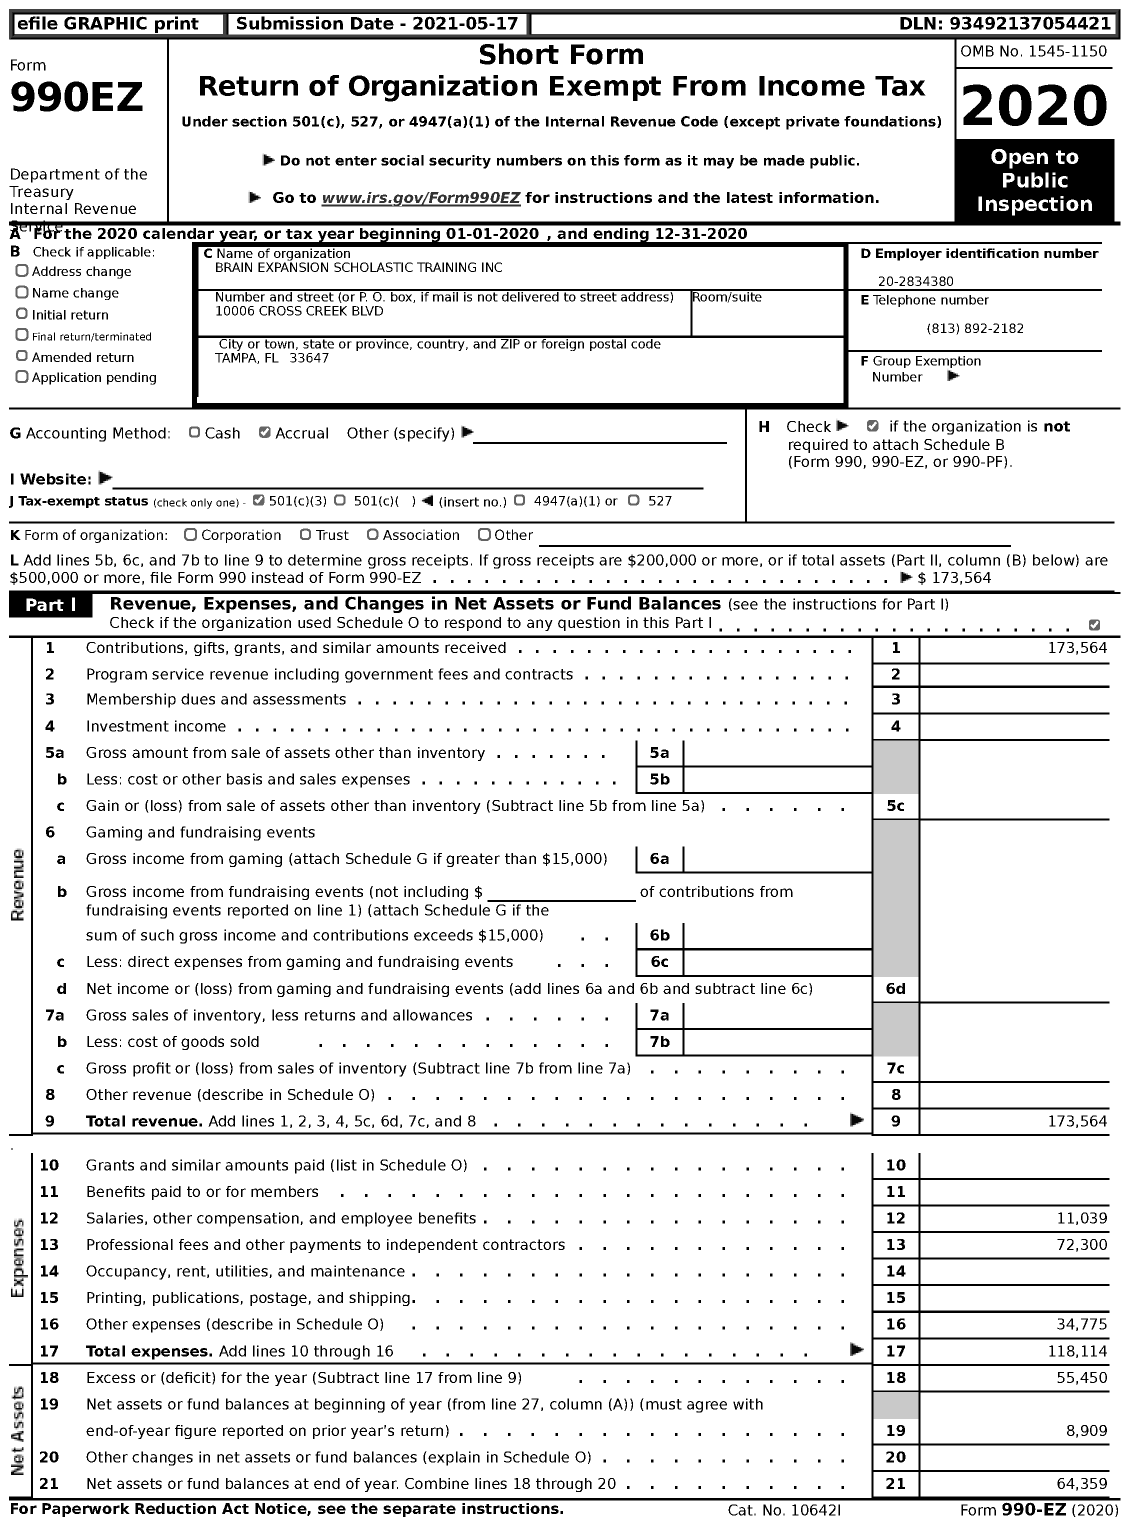 Image of first page of 2020 Form 990EZ for Brain Expansions Scholastic Training